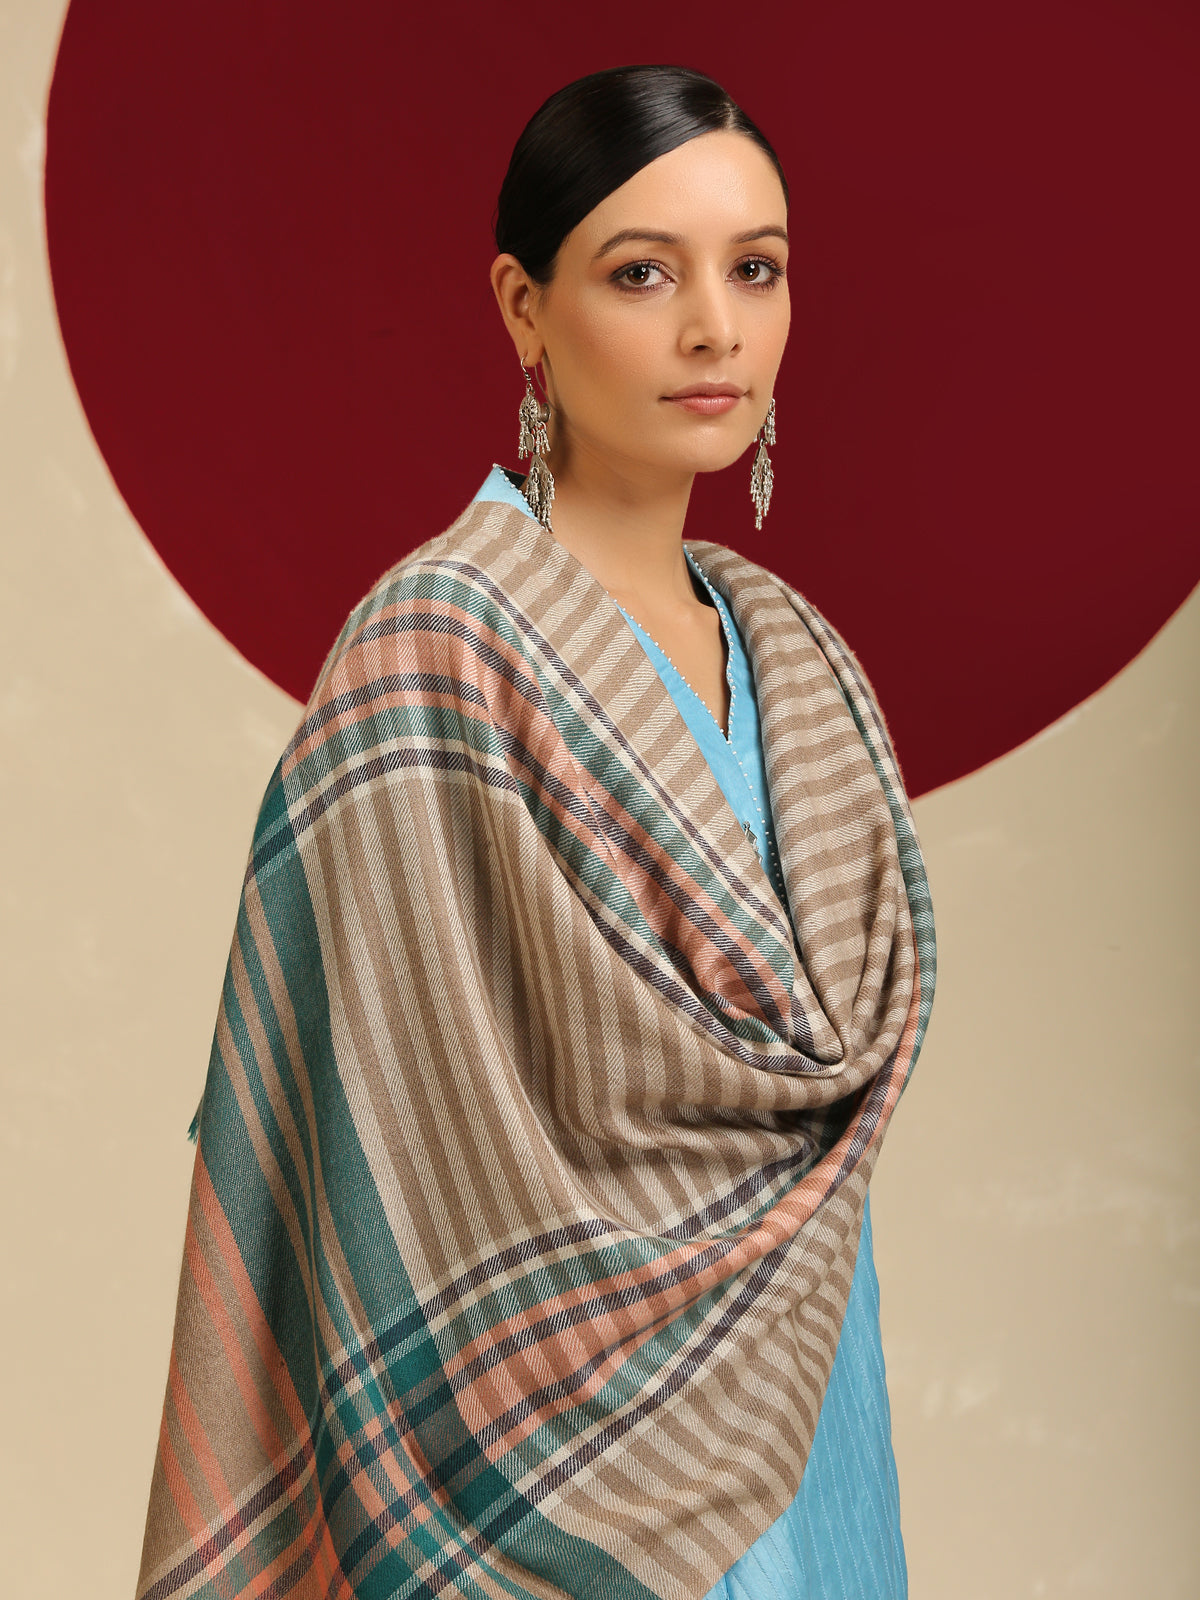 Model is wearing a pashmina check stole in multicoloured hues of orange, blue and green stripes/crosslines on a natural base.